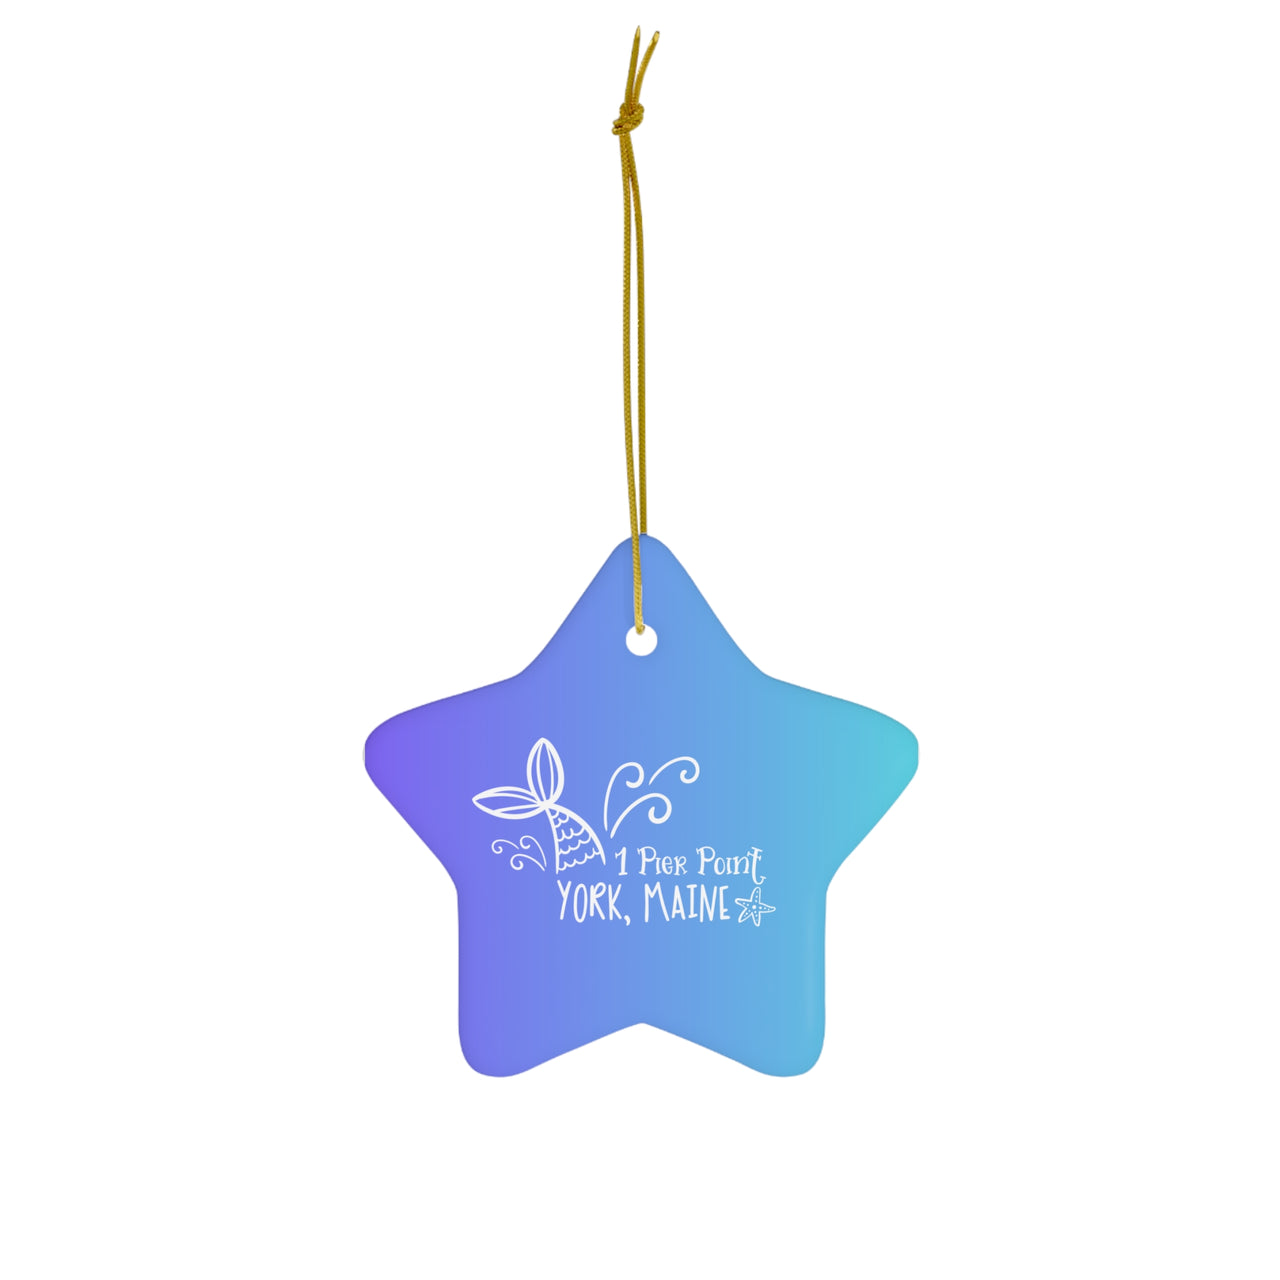 Personalized Coastal Ornament for Beach House, Star